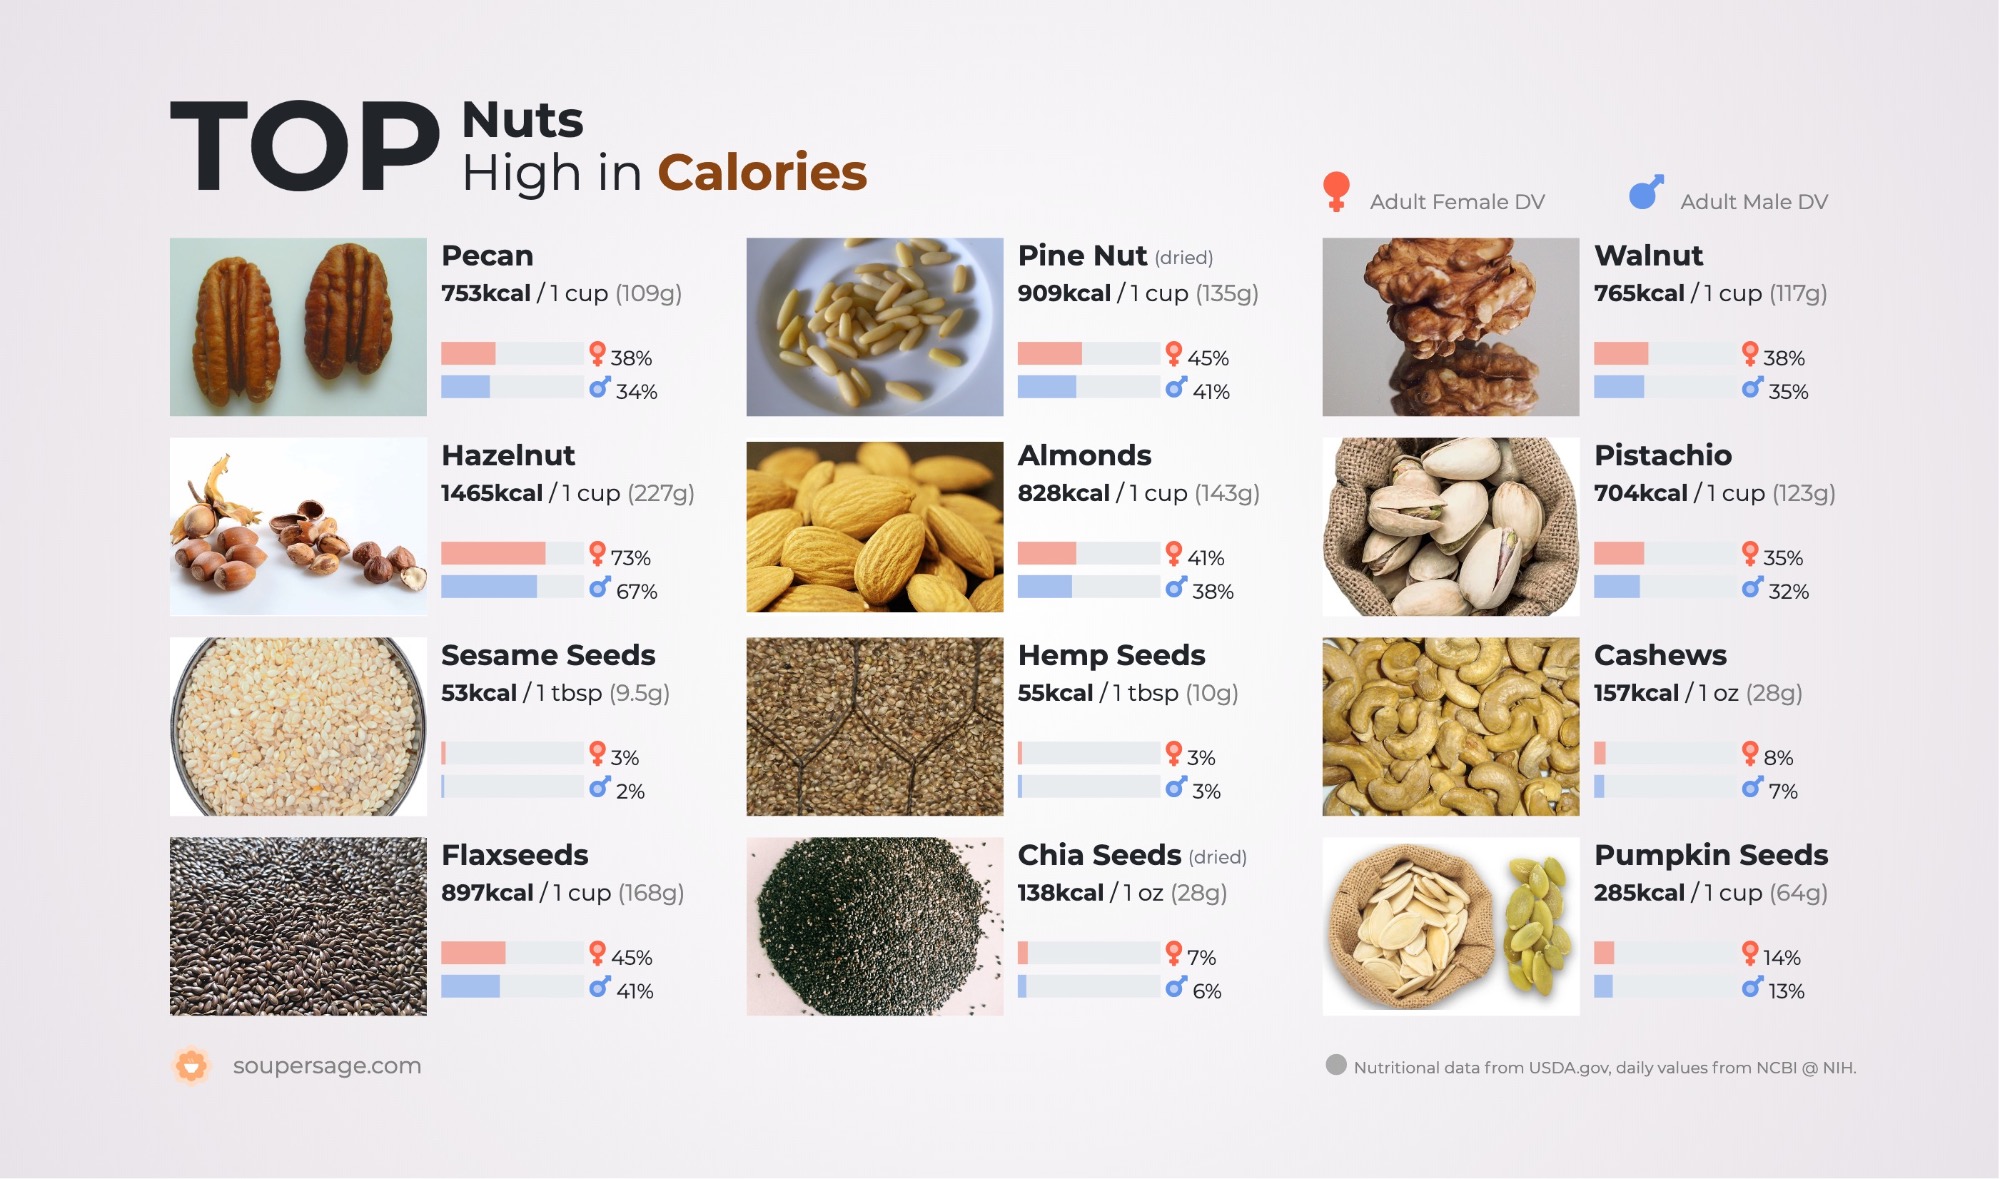 image of Top Nuts High in Calories